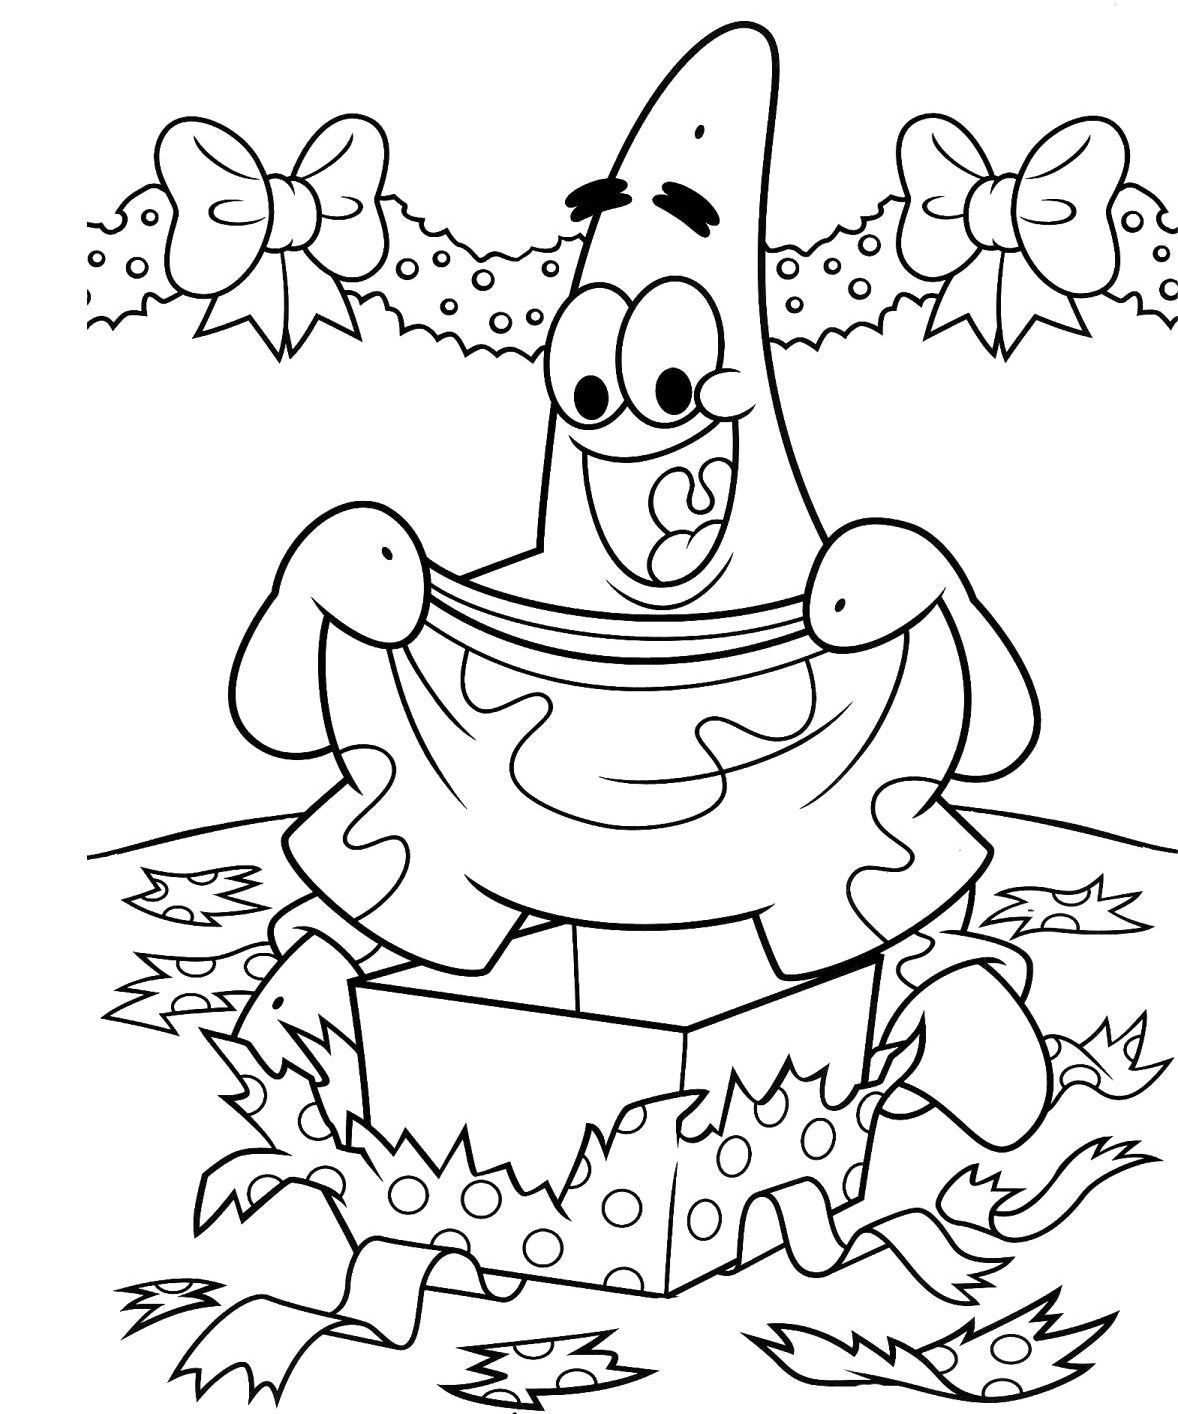 Christmas Coloring Pages Free
 Spongebob Christmas Coloring Pages Coloring Home